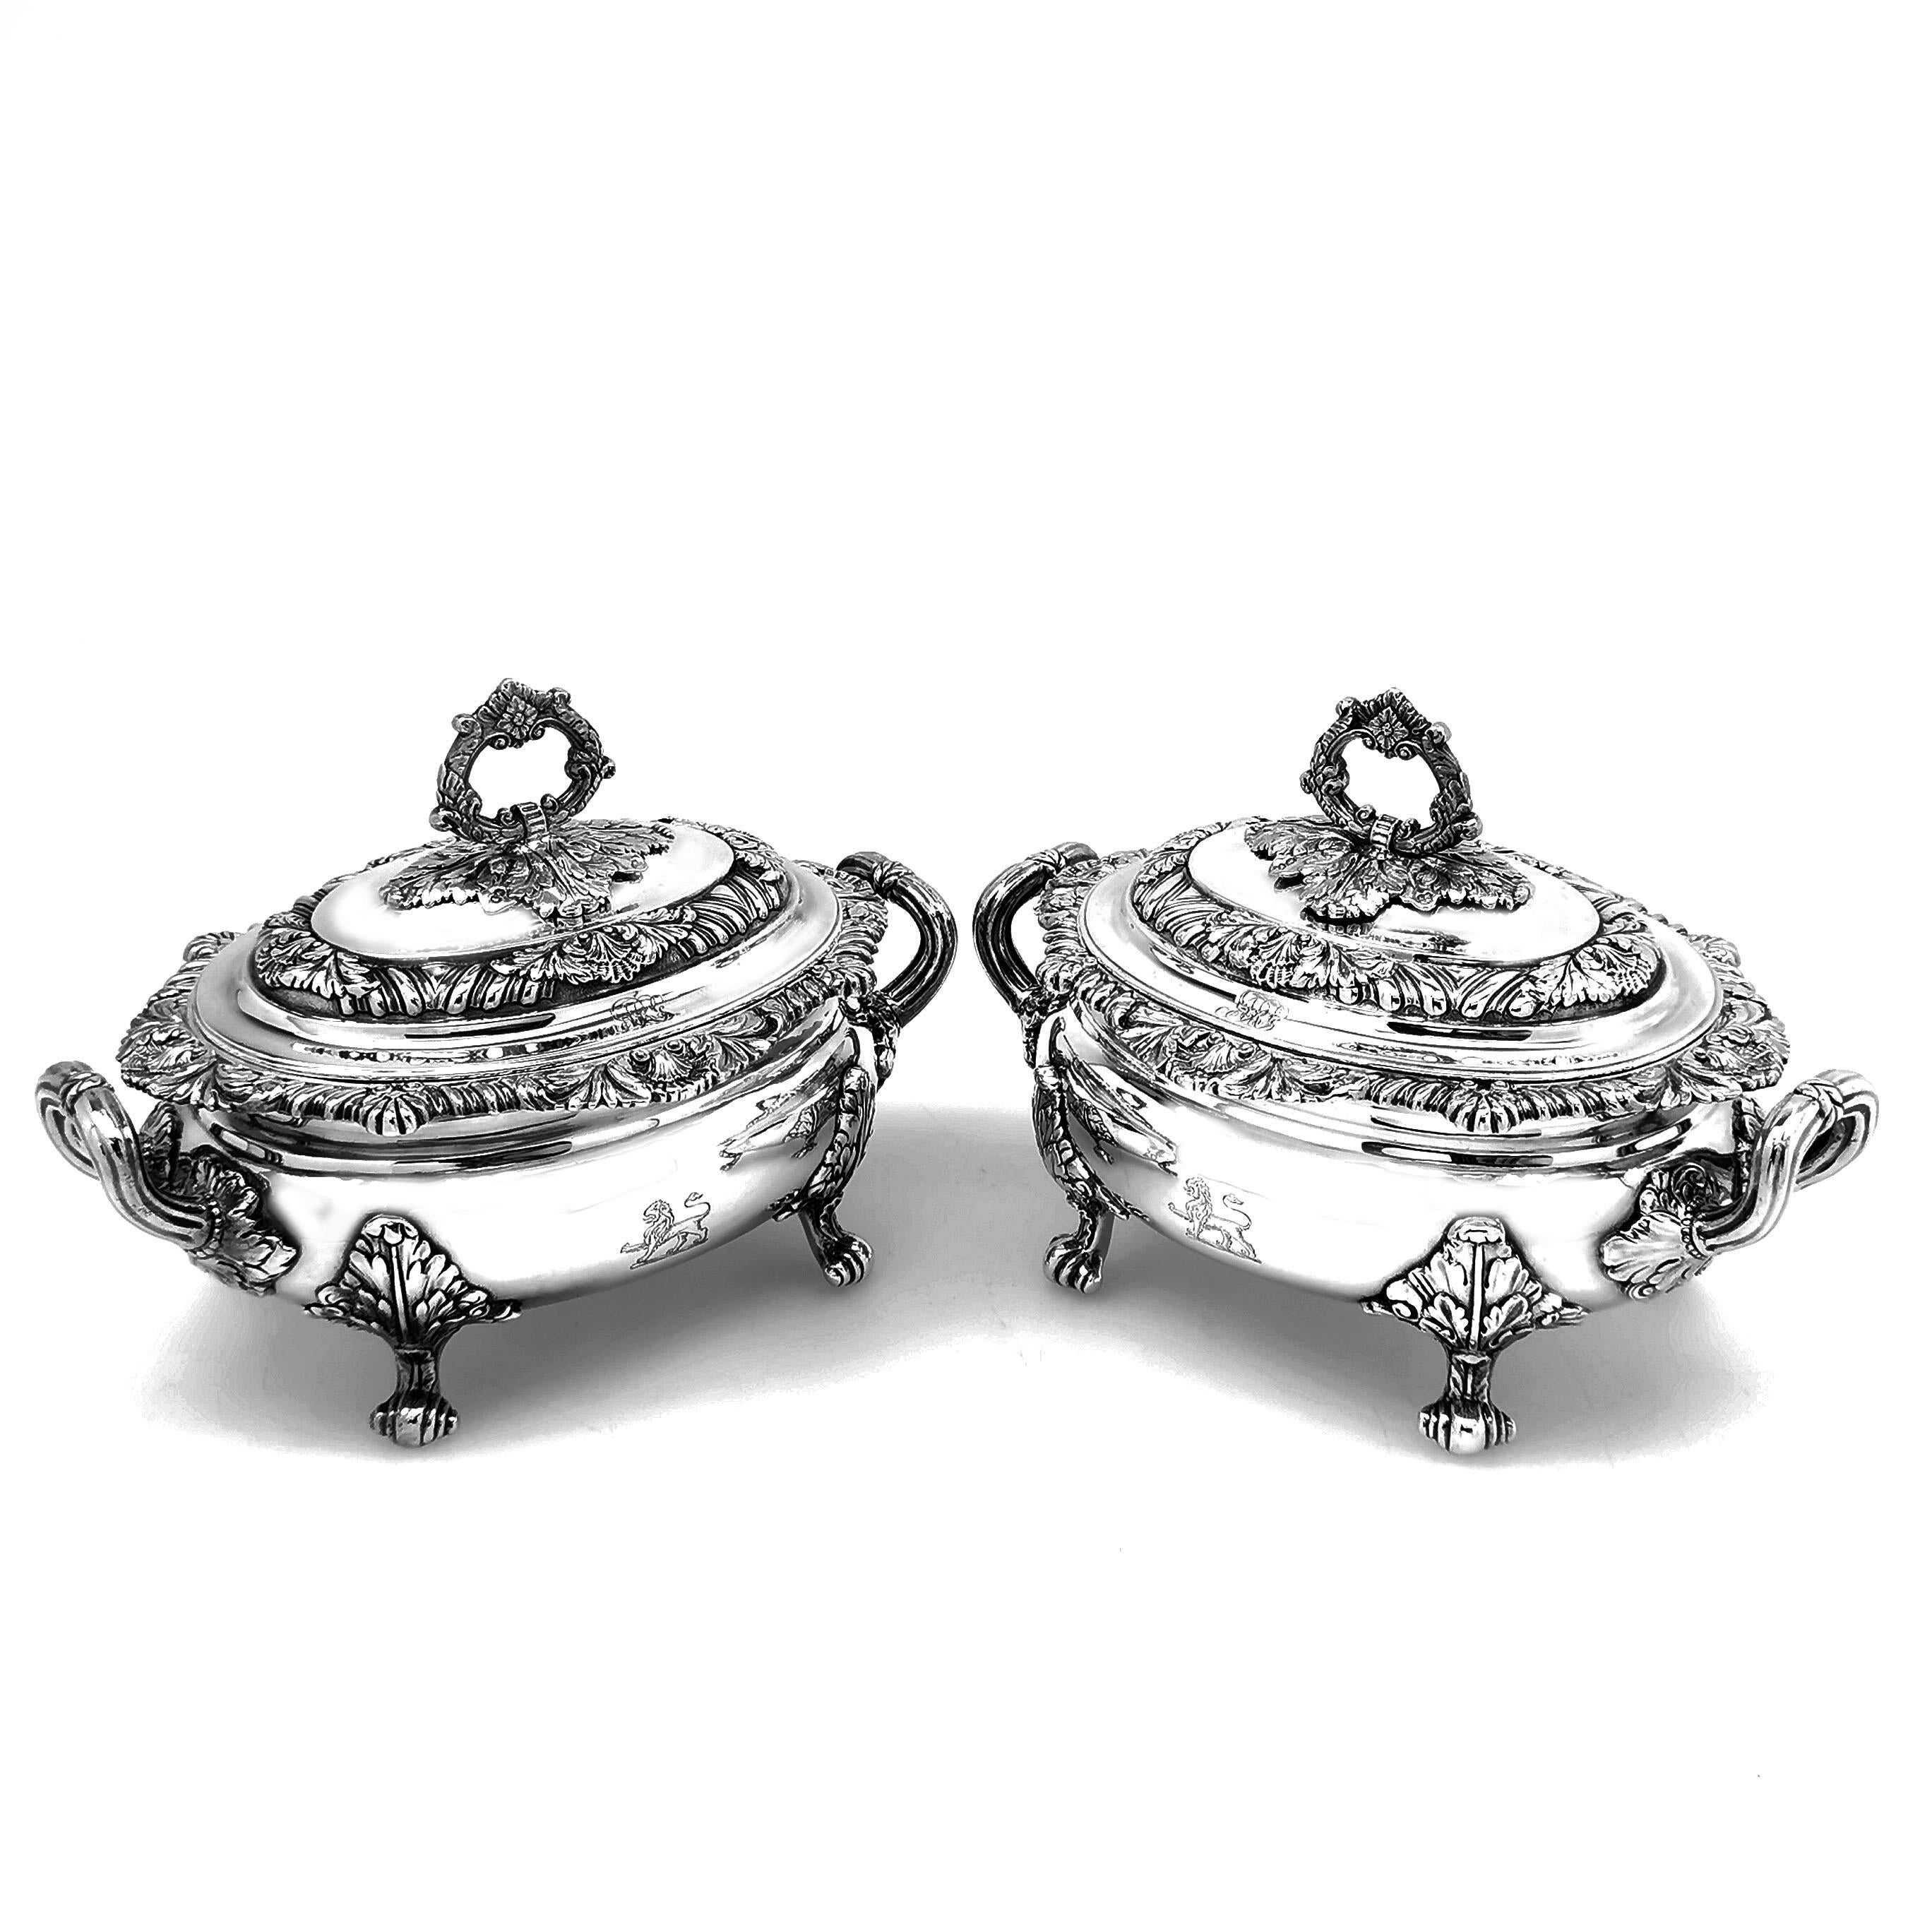 English Pair of Antique Georgian Sterling Silver Sauce Tureens, 1821